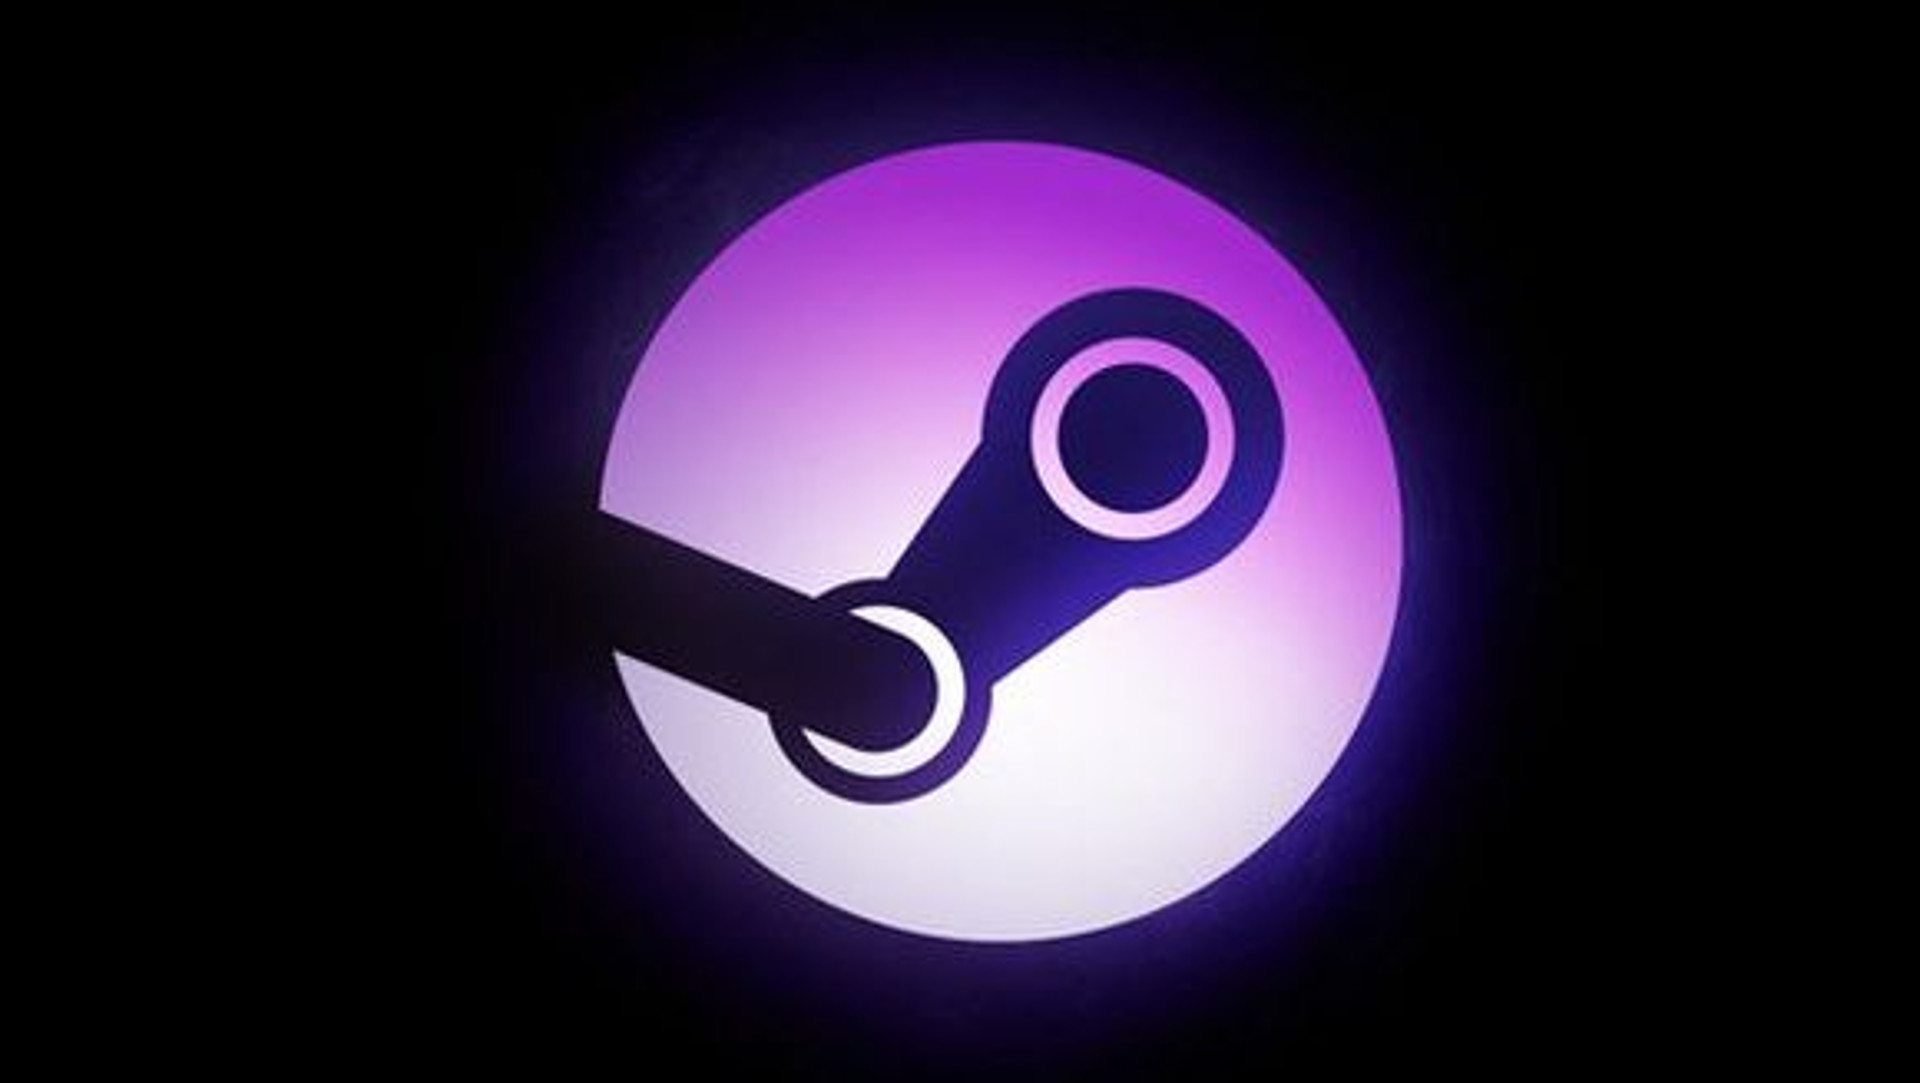 Leeson: How to revert to the old Steam Library UI after Patch - Windows,  Linux, Mac OSX (Screenshot) : Free Download, Borrow, and Streaming :  Internet Archive